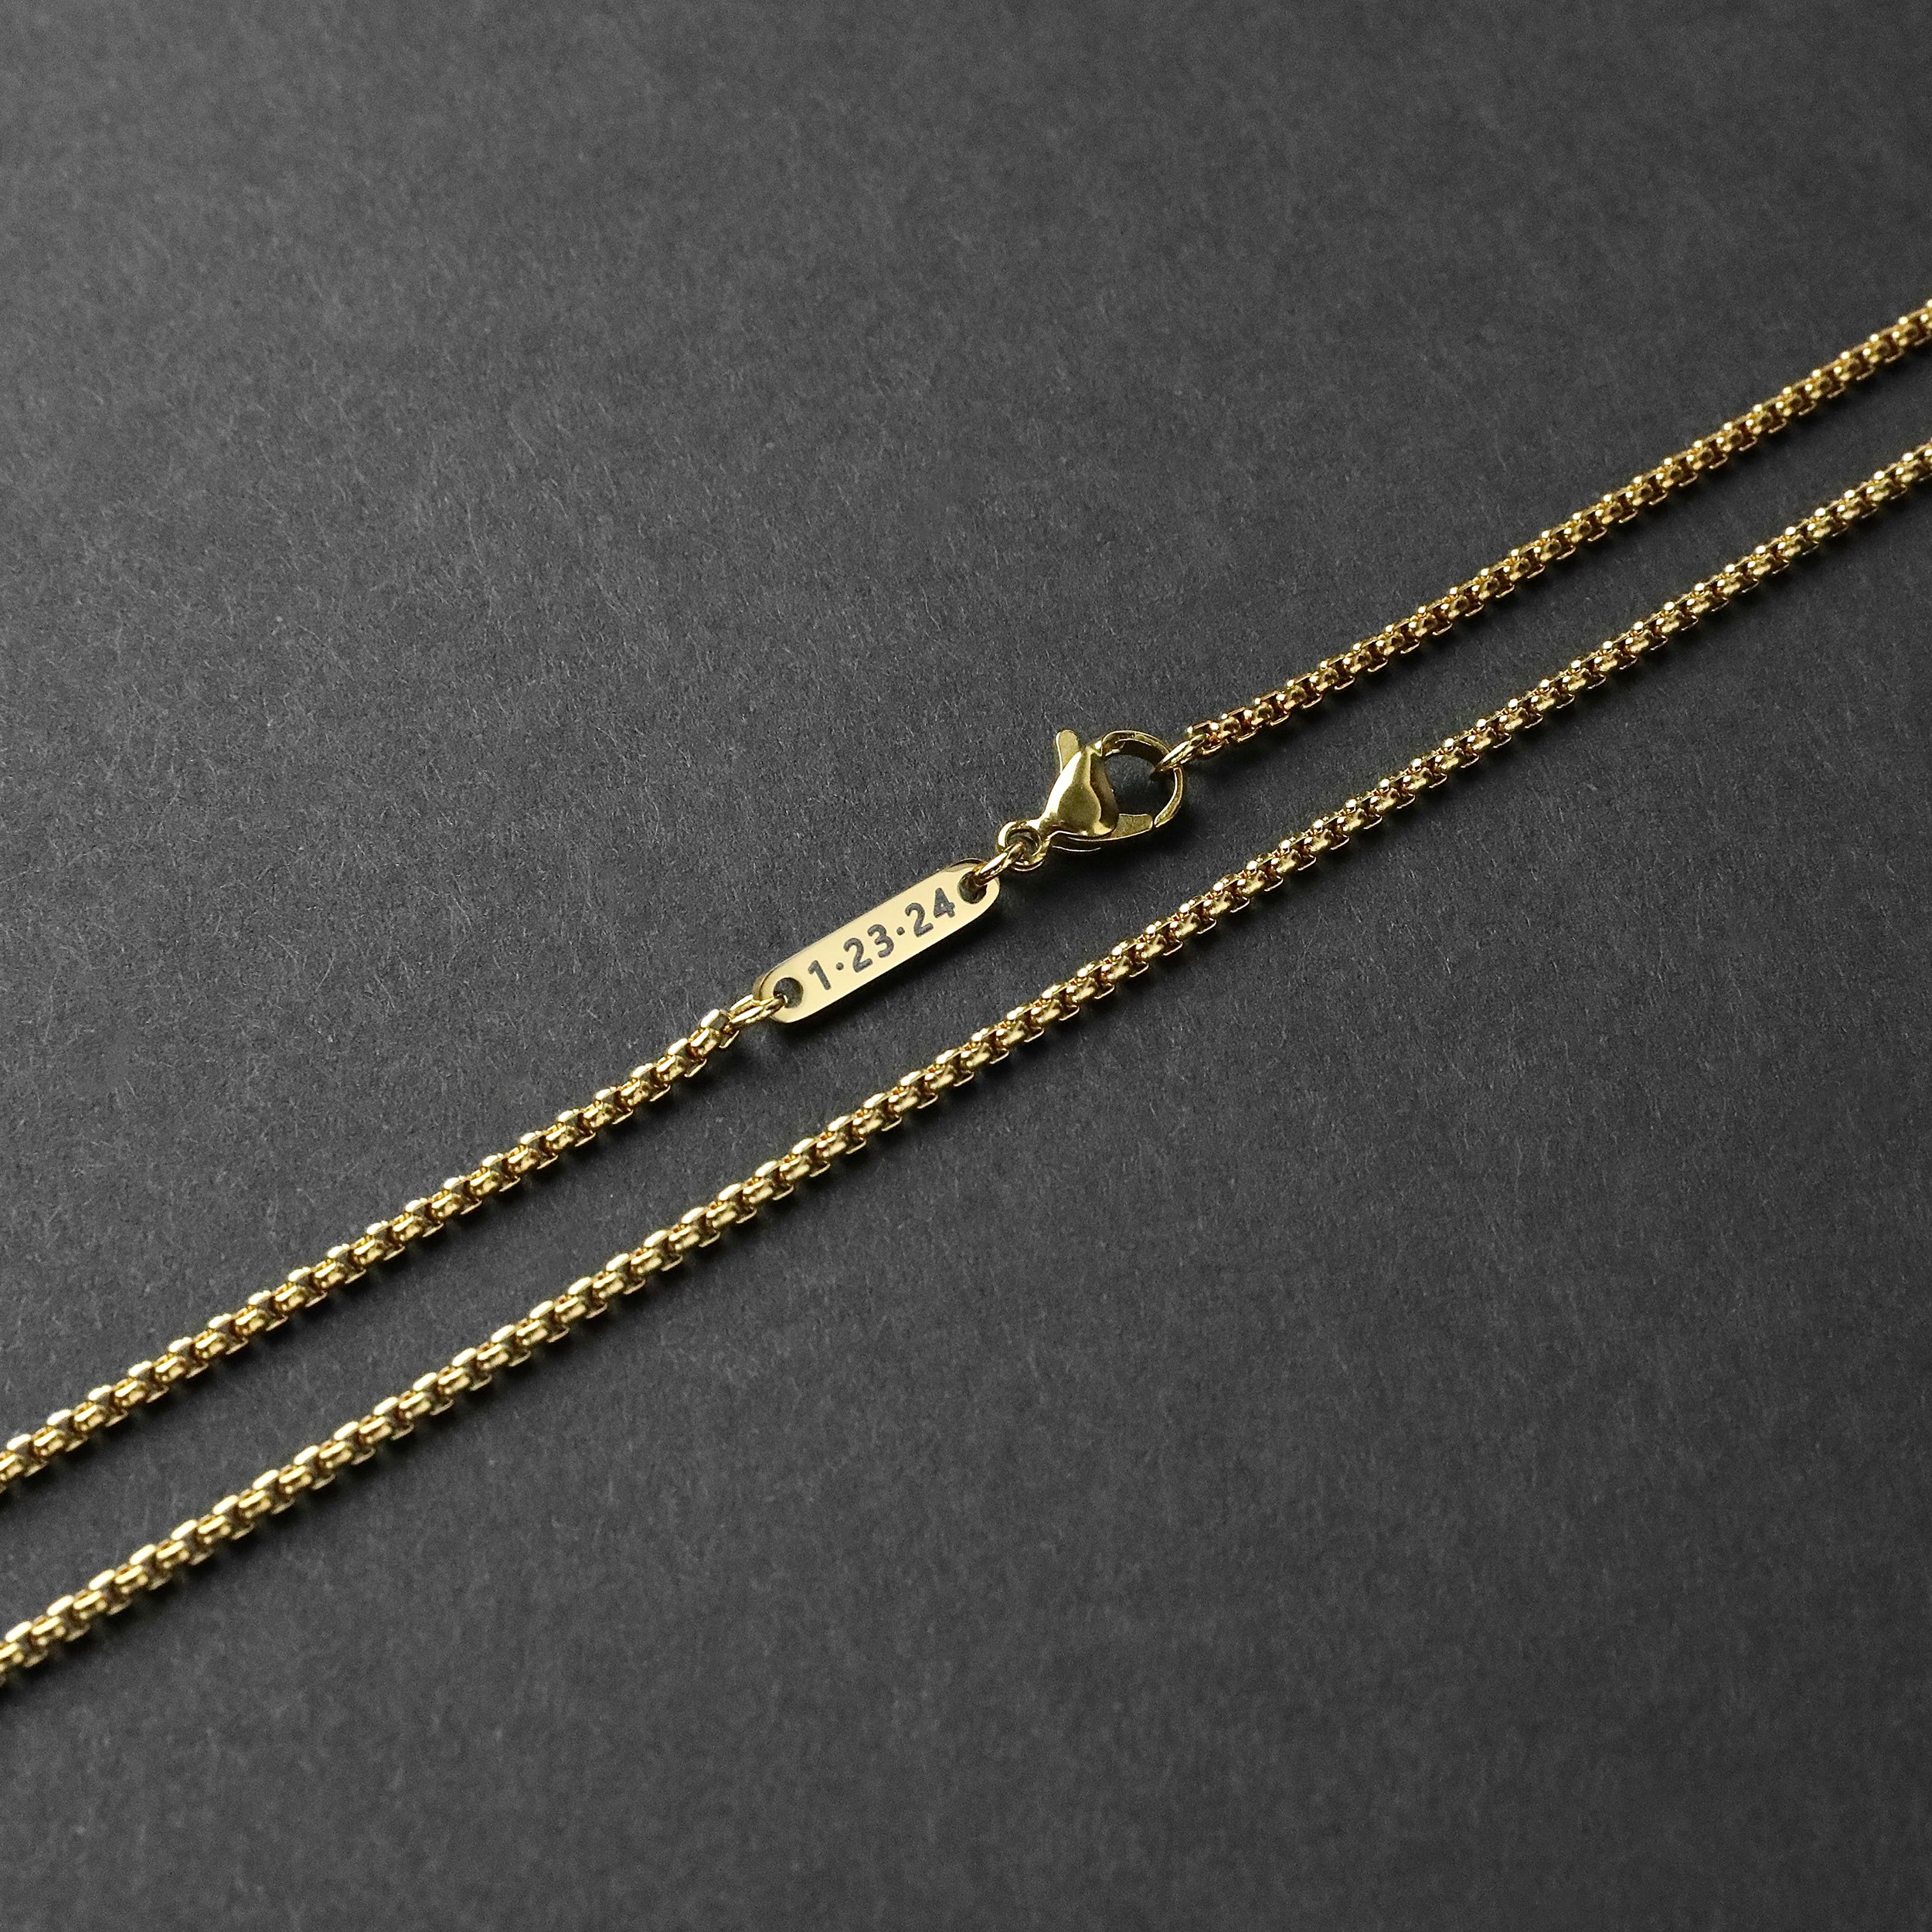 Personalized Box Chain - Gold 2mm